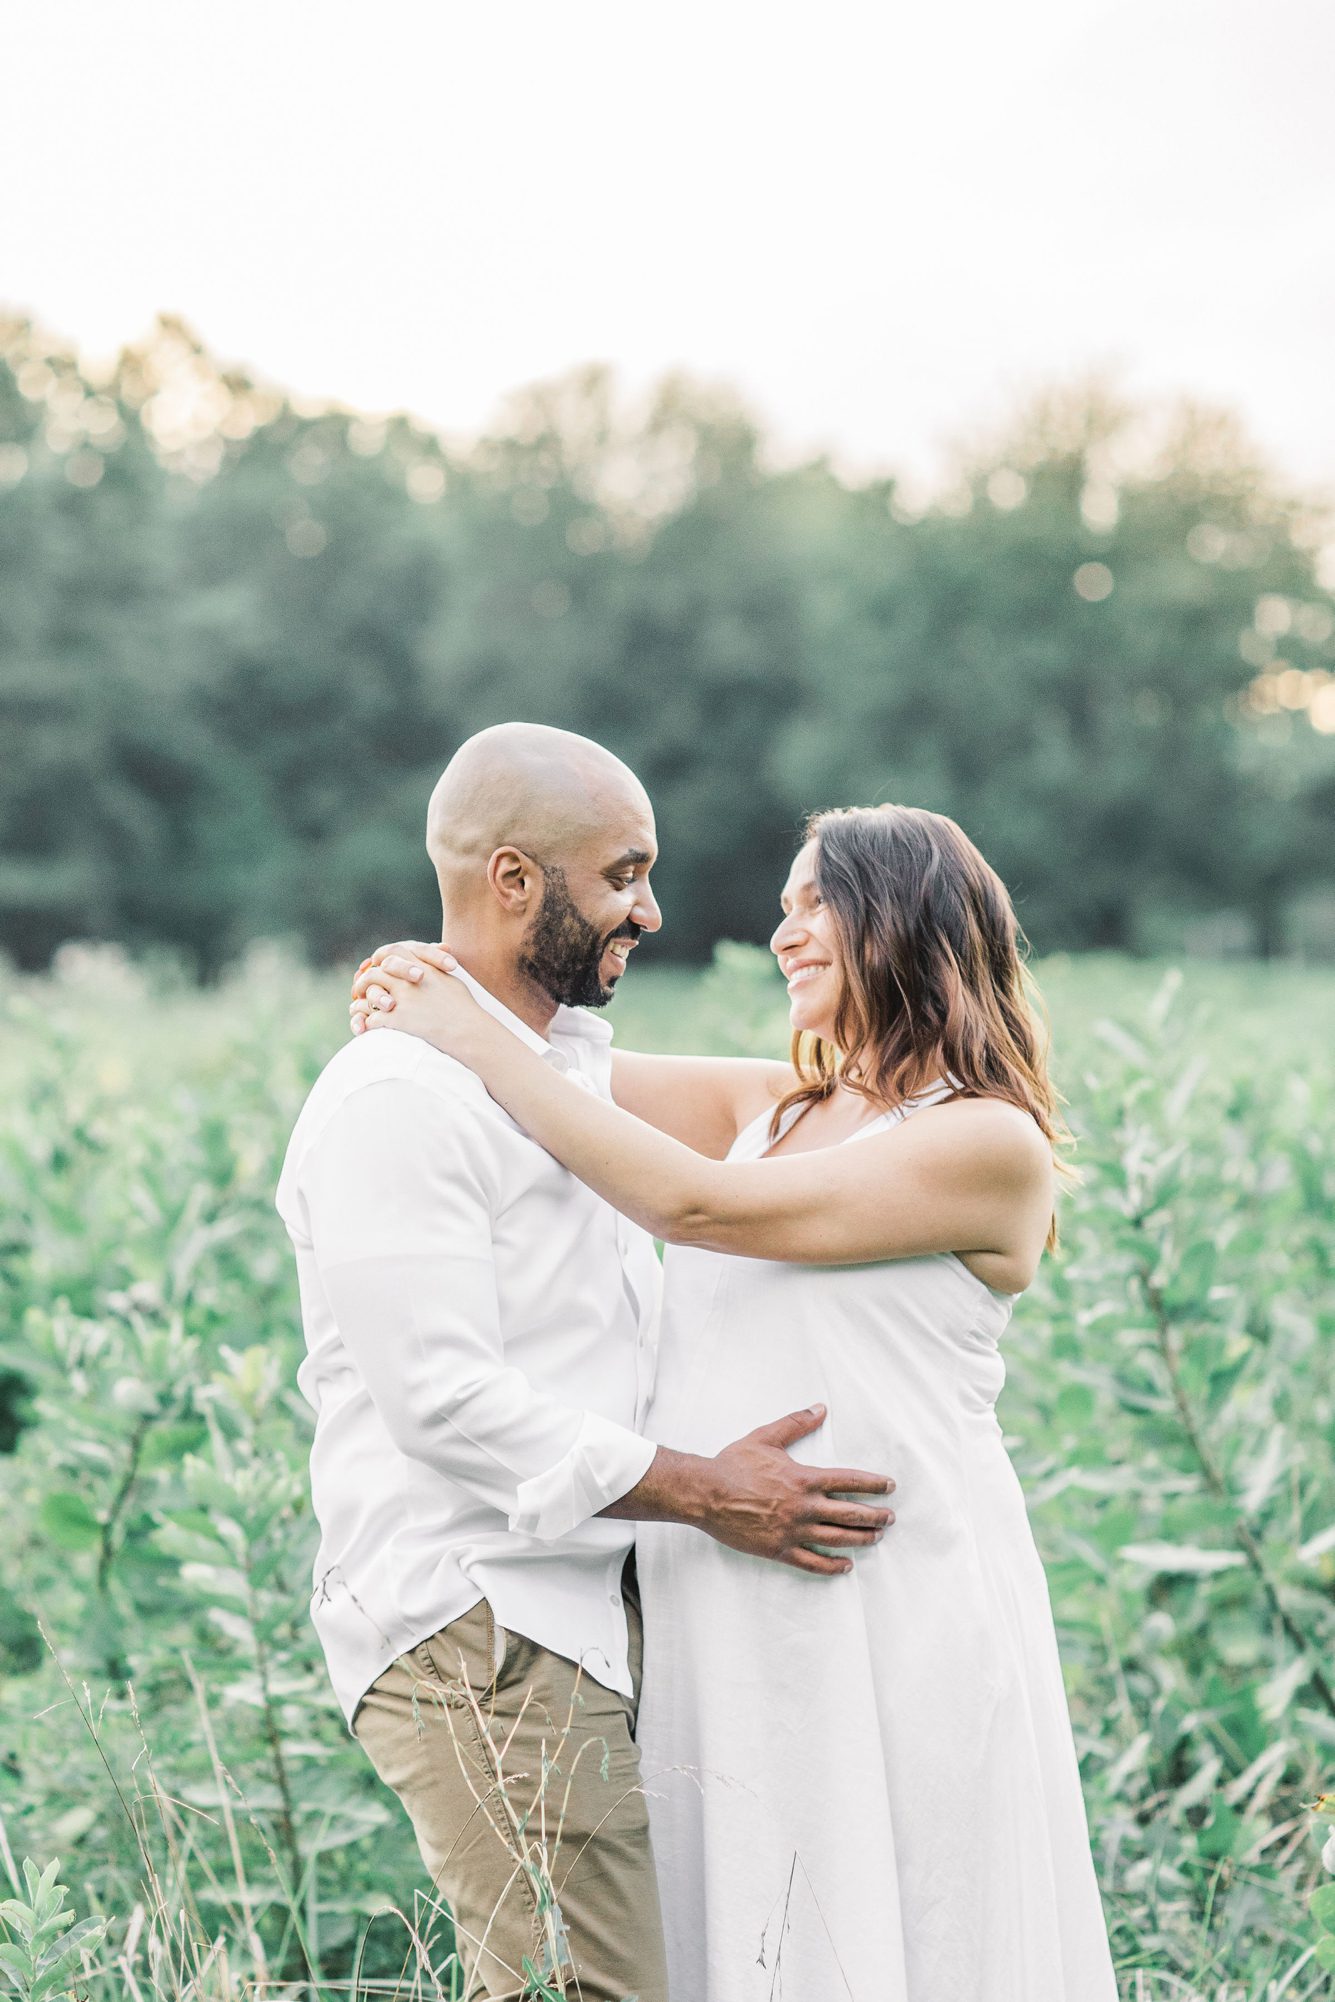 MOm and Dad hugging during maternity session at Rock Creek Park. Photo by Washington DC maternity photographer, LRG Portraits.